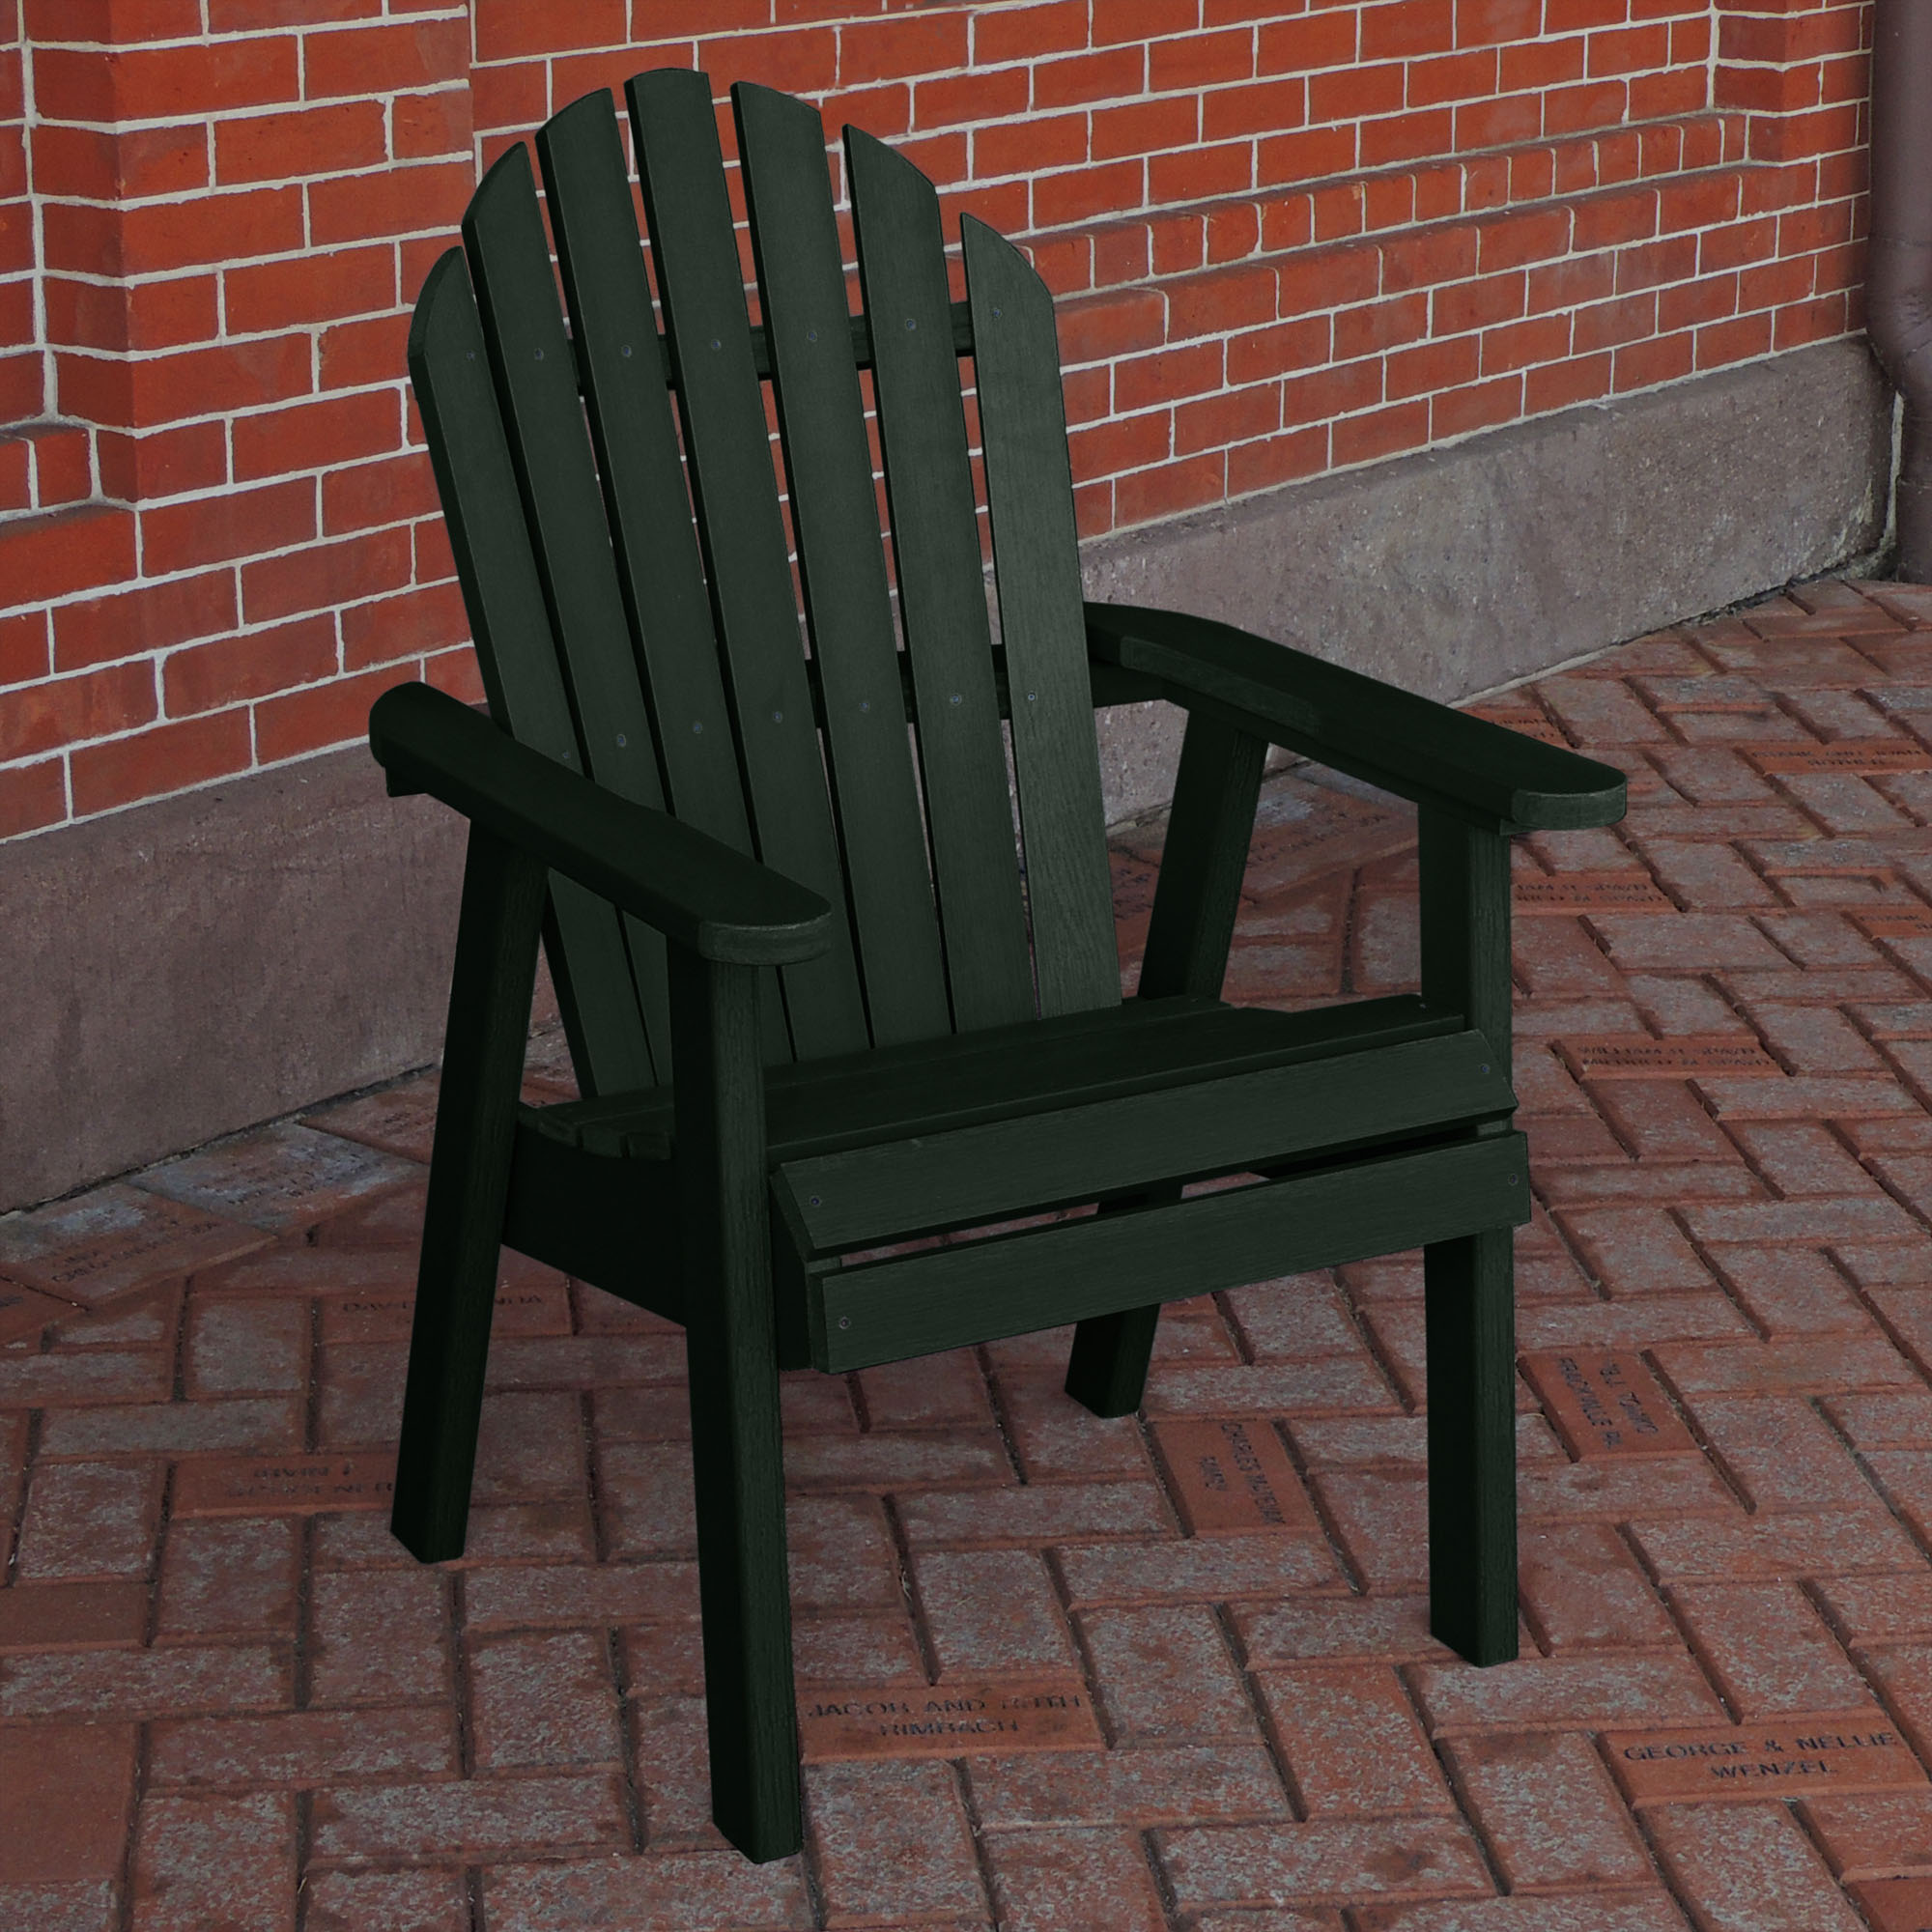 The Sequoia Professional Commercial Grade Muskoka Adirondack Deck Dining Chair - image 2 of 5